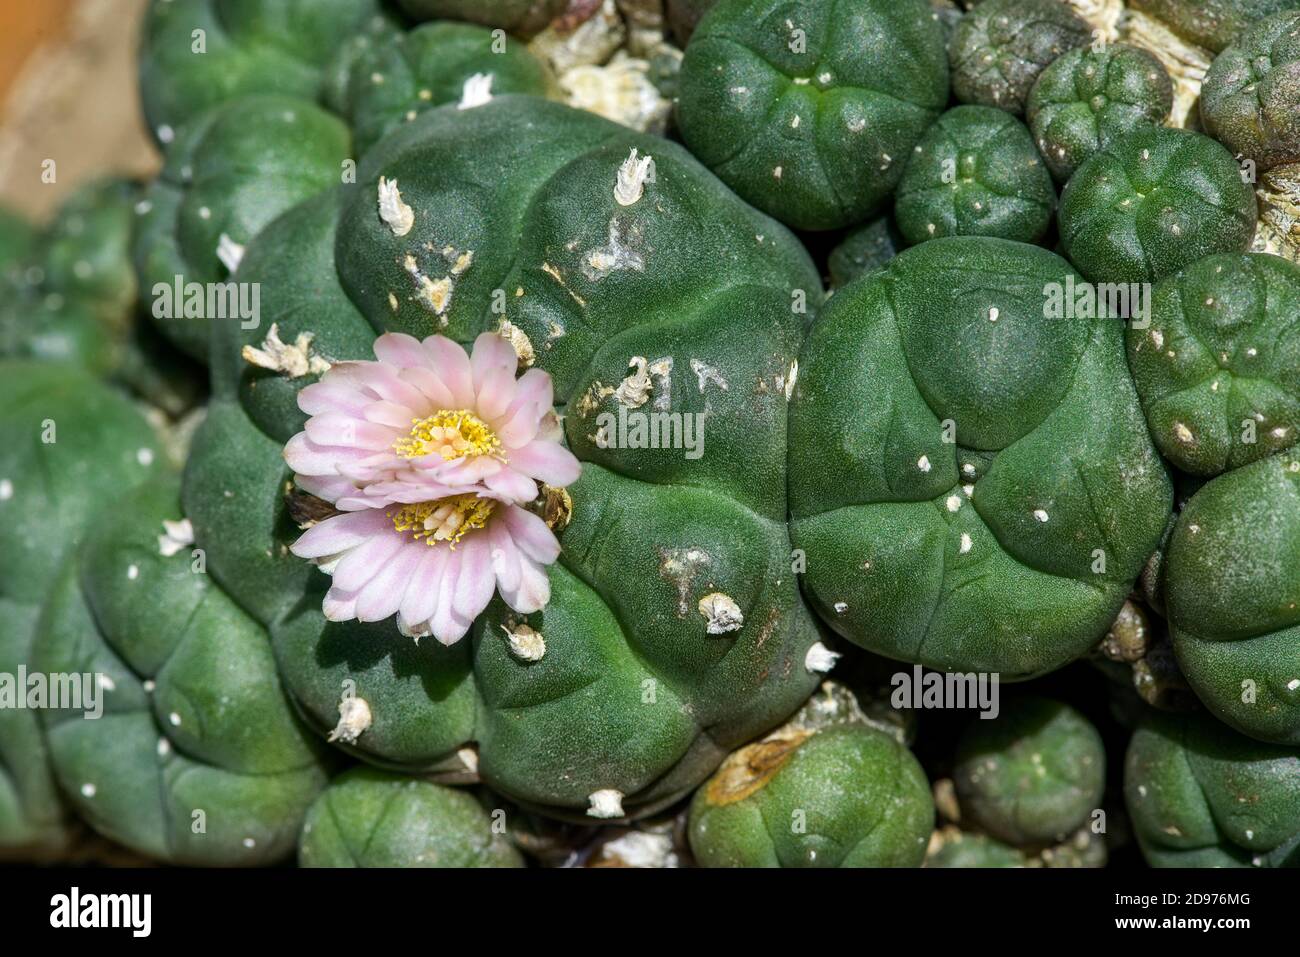 Peyote (Lophophora williamsii) is a small, spineless cactus with psychoactive alkaloids, particularly mescaline. It is native to Mexico and southweste Stock Photo